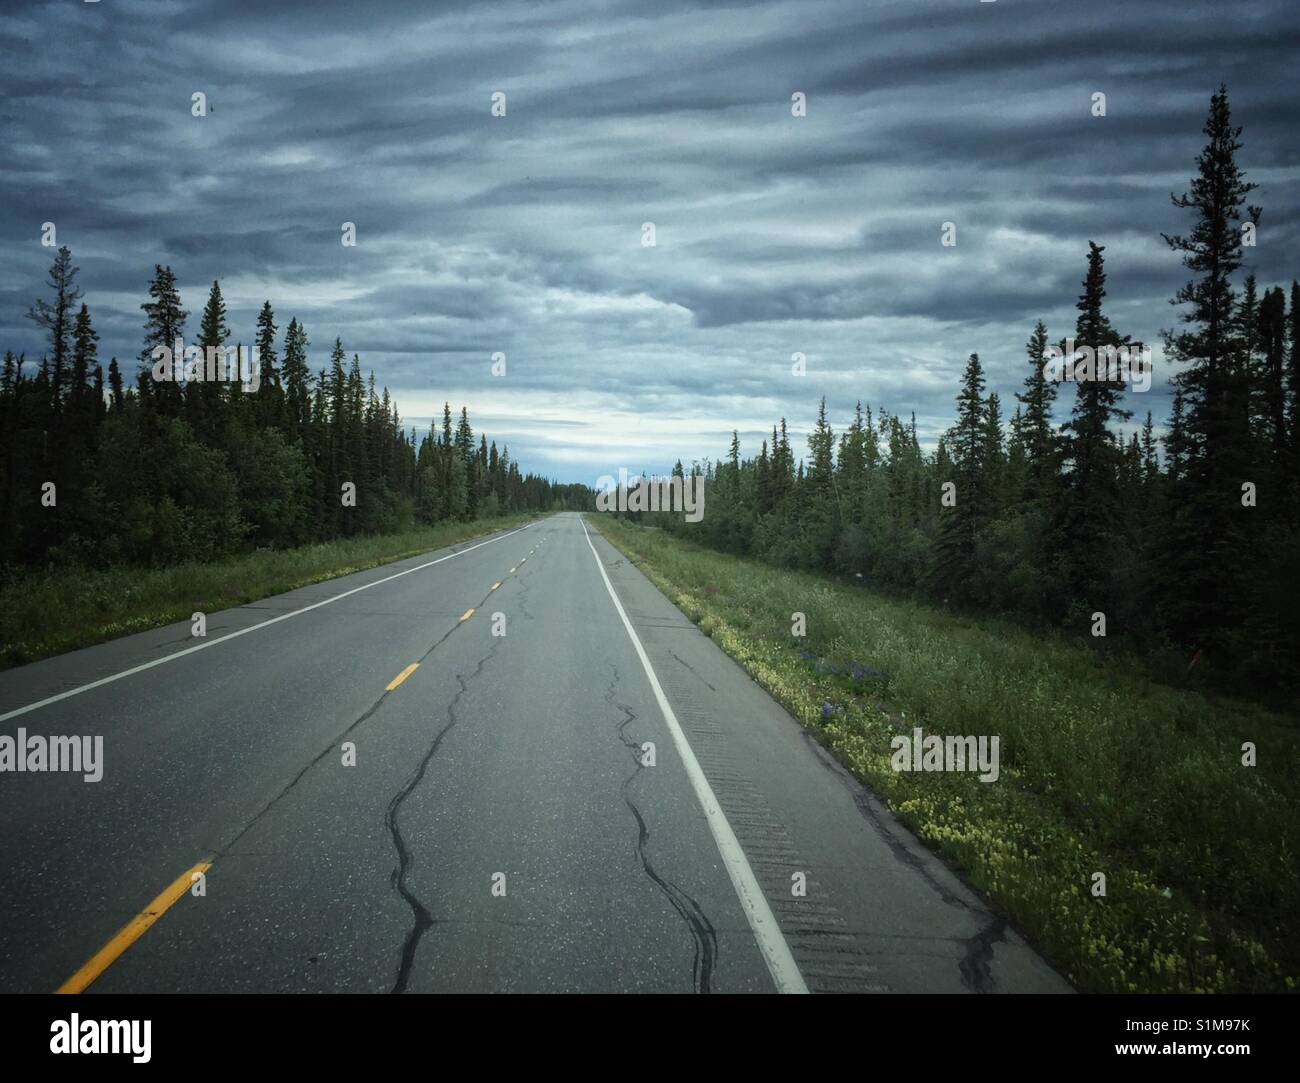 Straight road  with vanishing point leading into remote wildness of the Alaska interior on cloudy day. Stock Photo